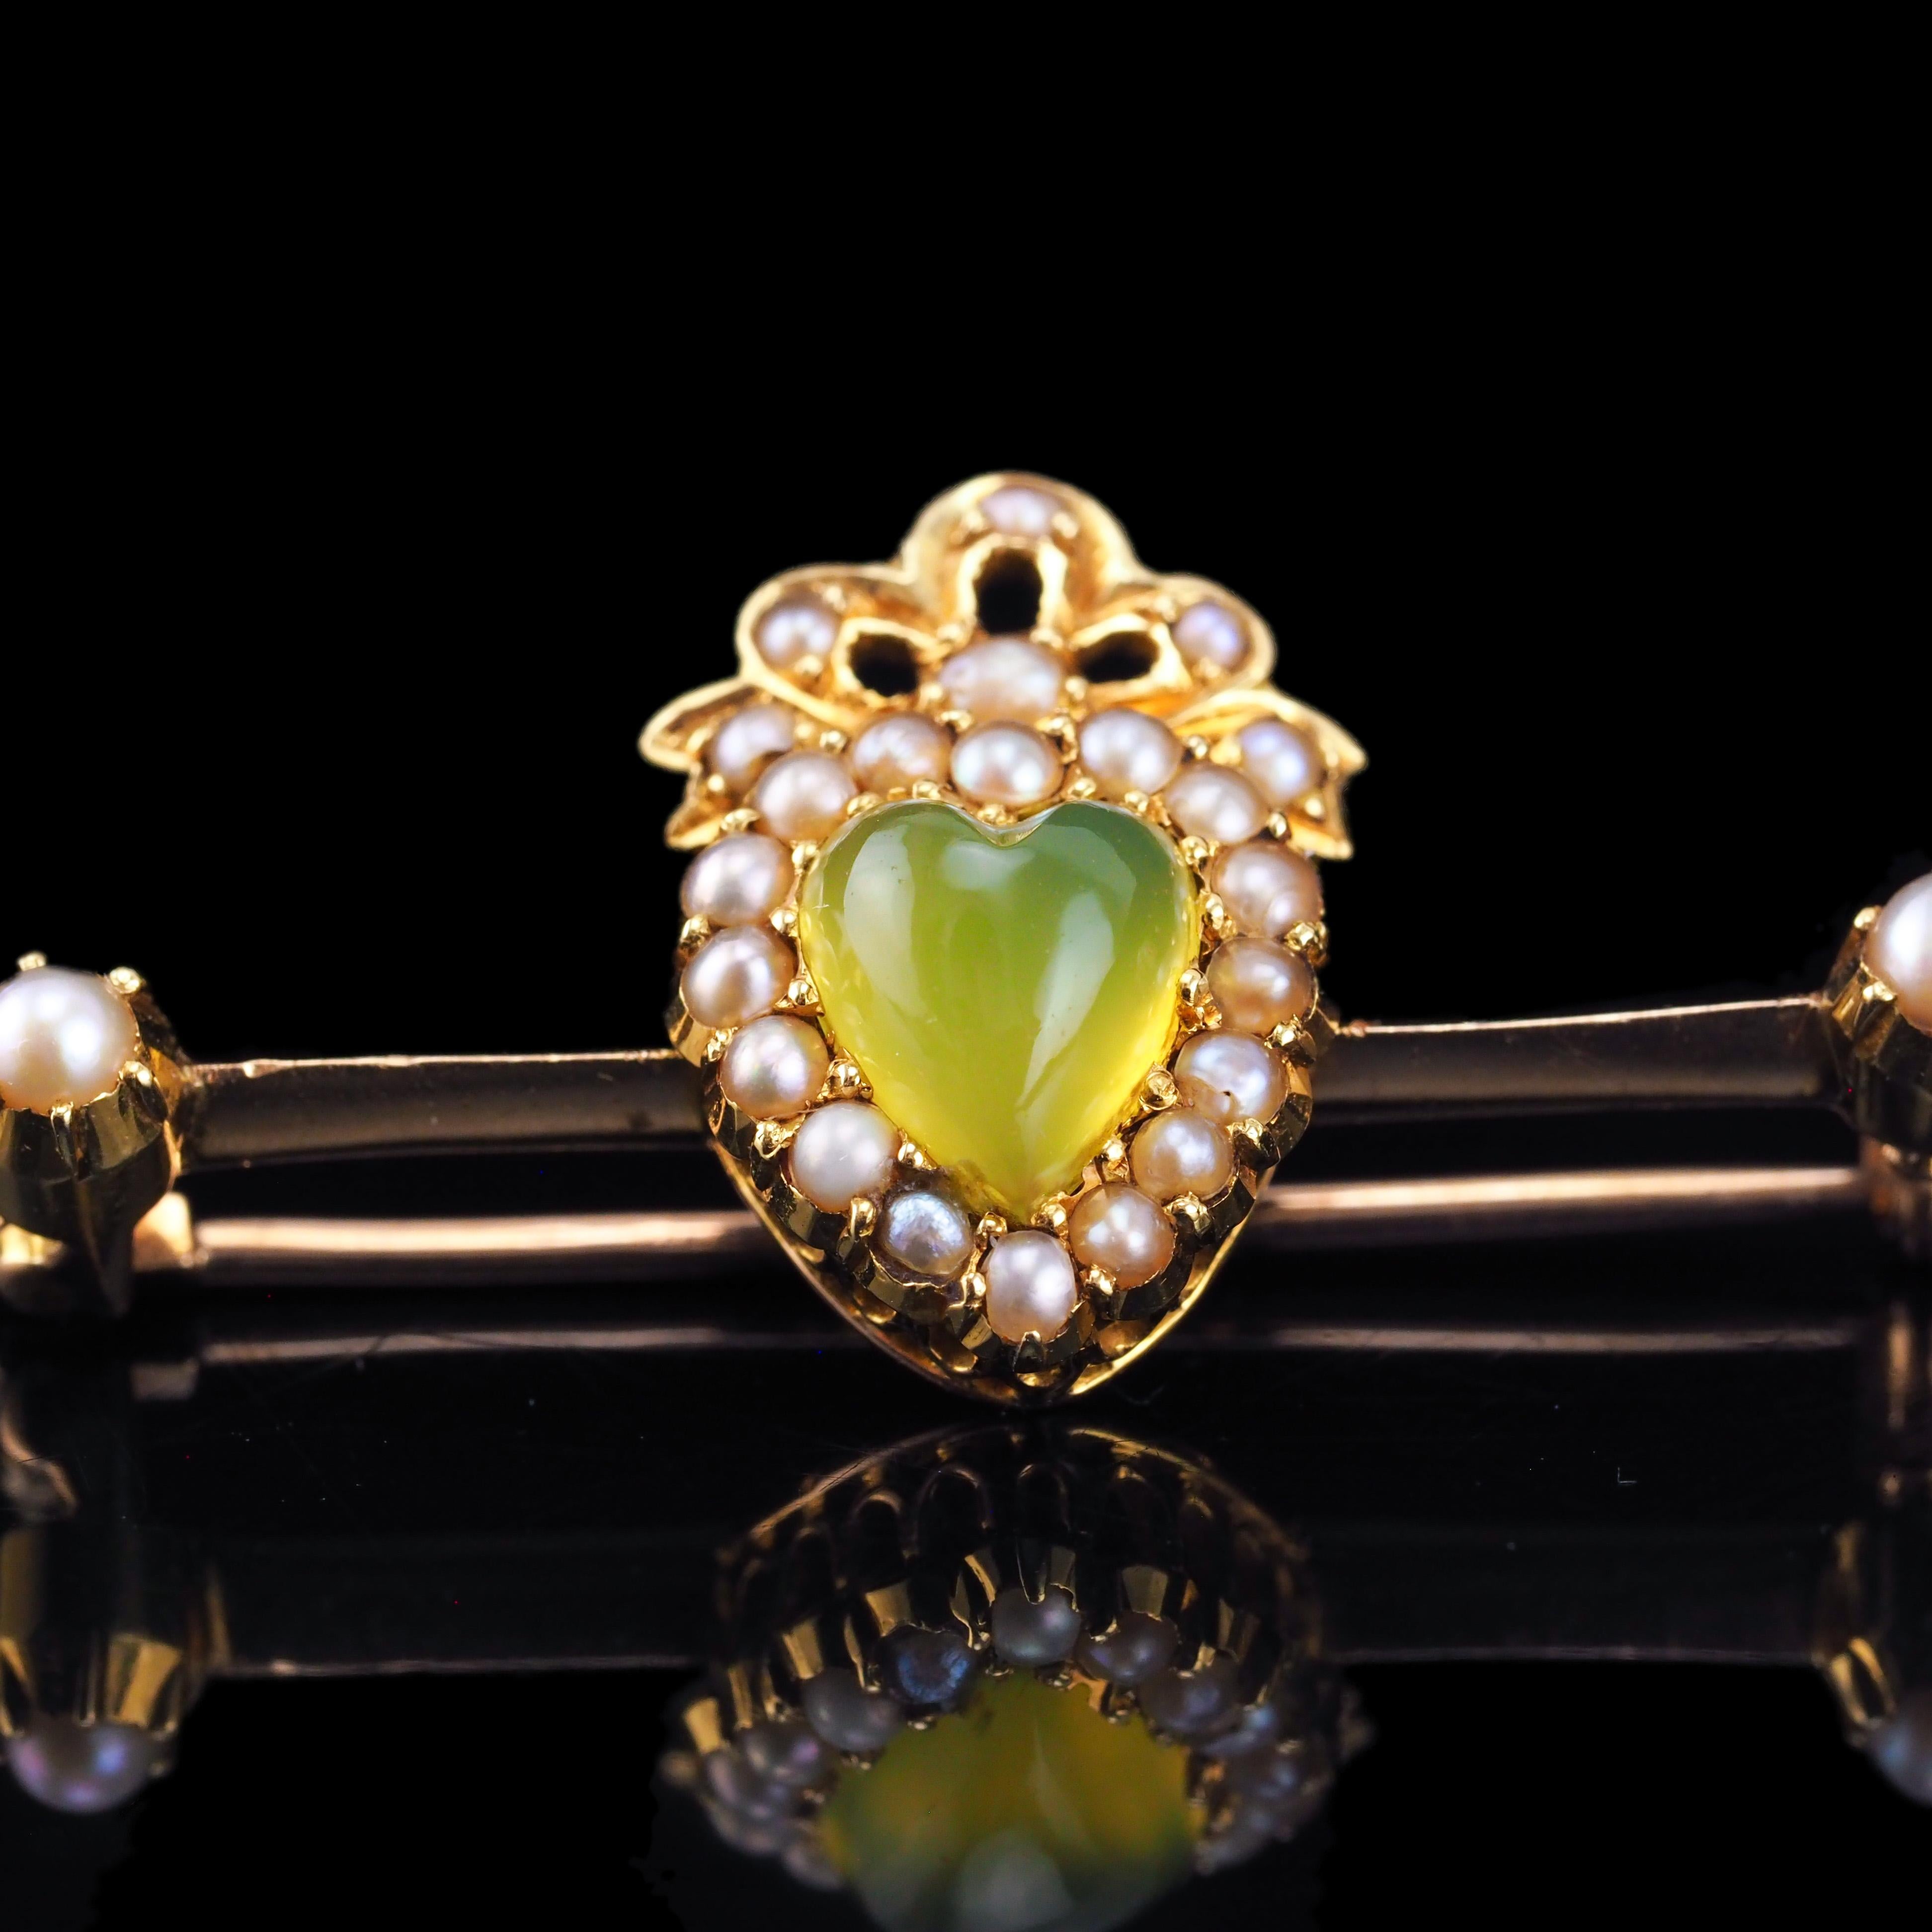 Antique Victorian Chalcedony Brooch  Seed Pearls 15K Gold Heart Shaped c.1890 For Sale 2